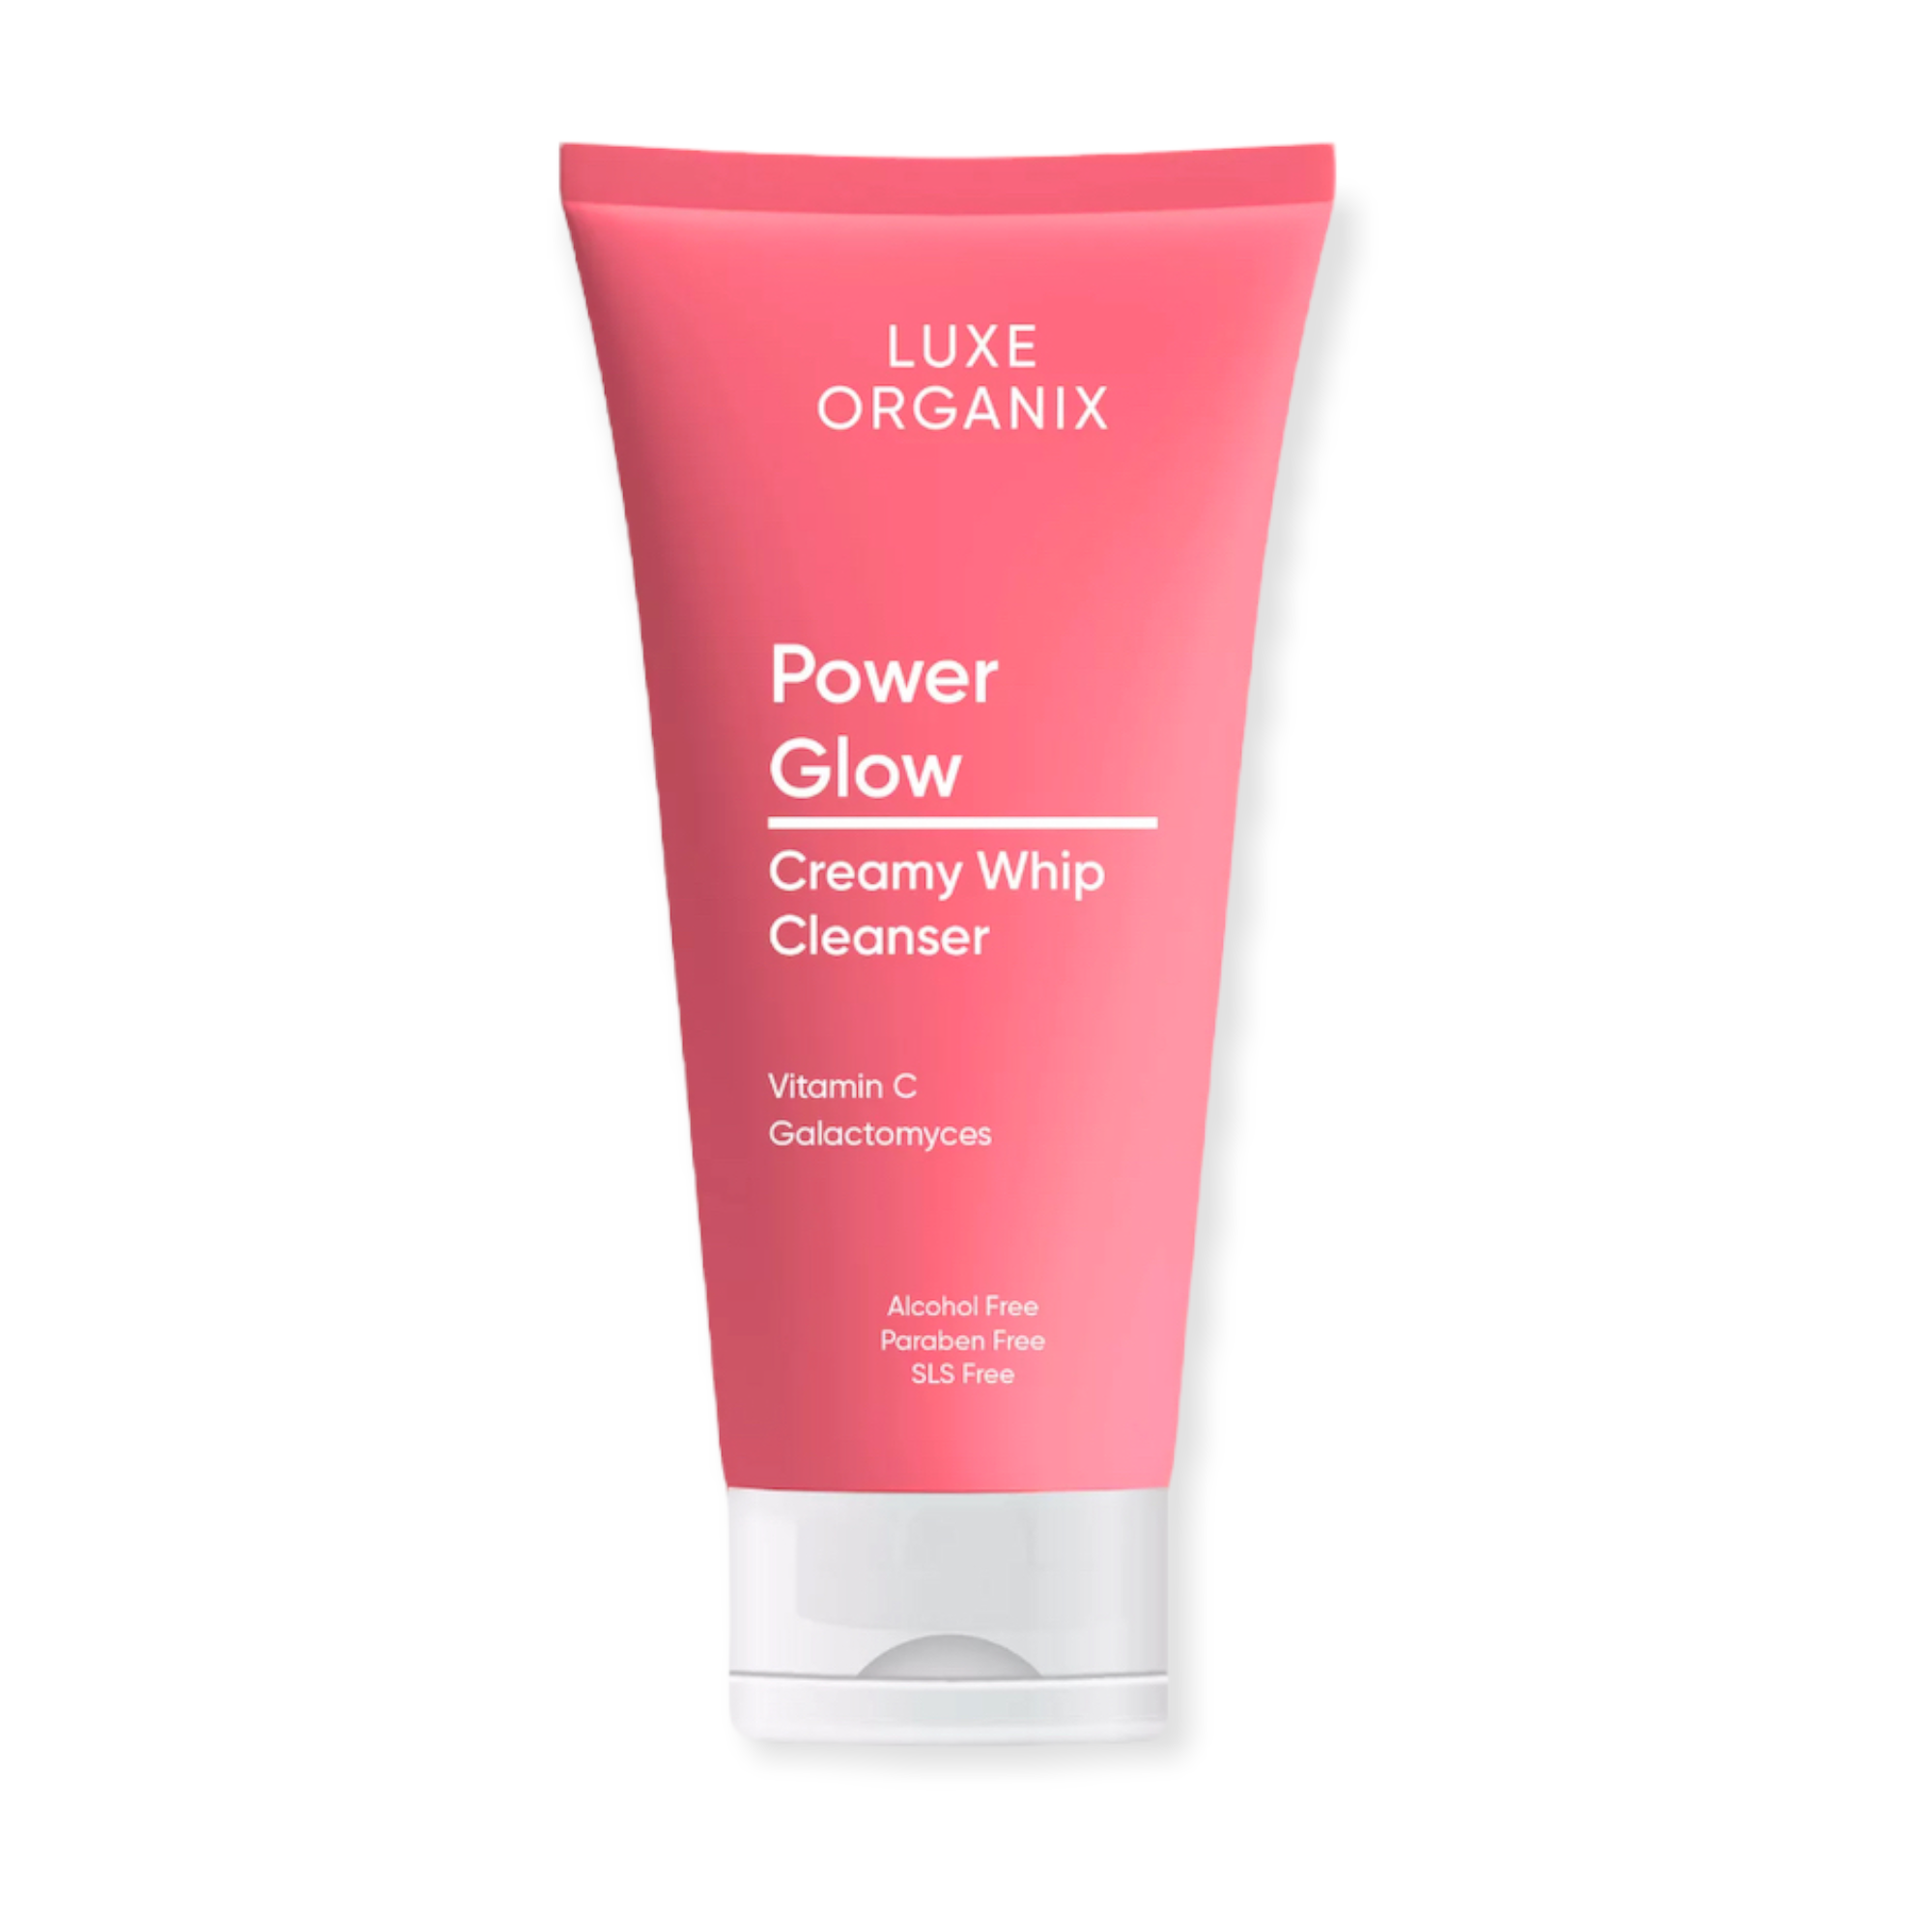 Luxe Organix Power Glow Creamy Whip Cleanser 150ml - (pink)